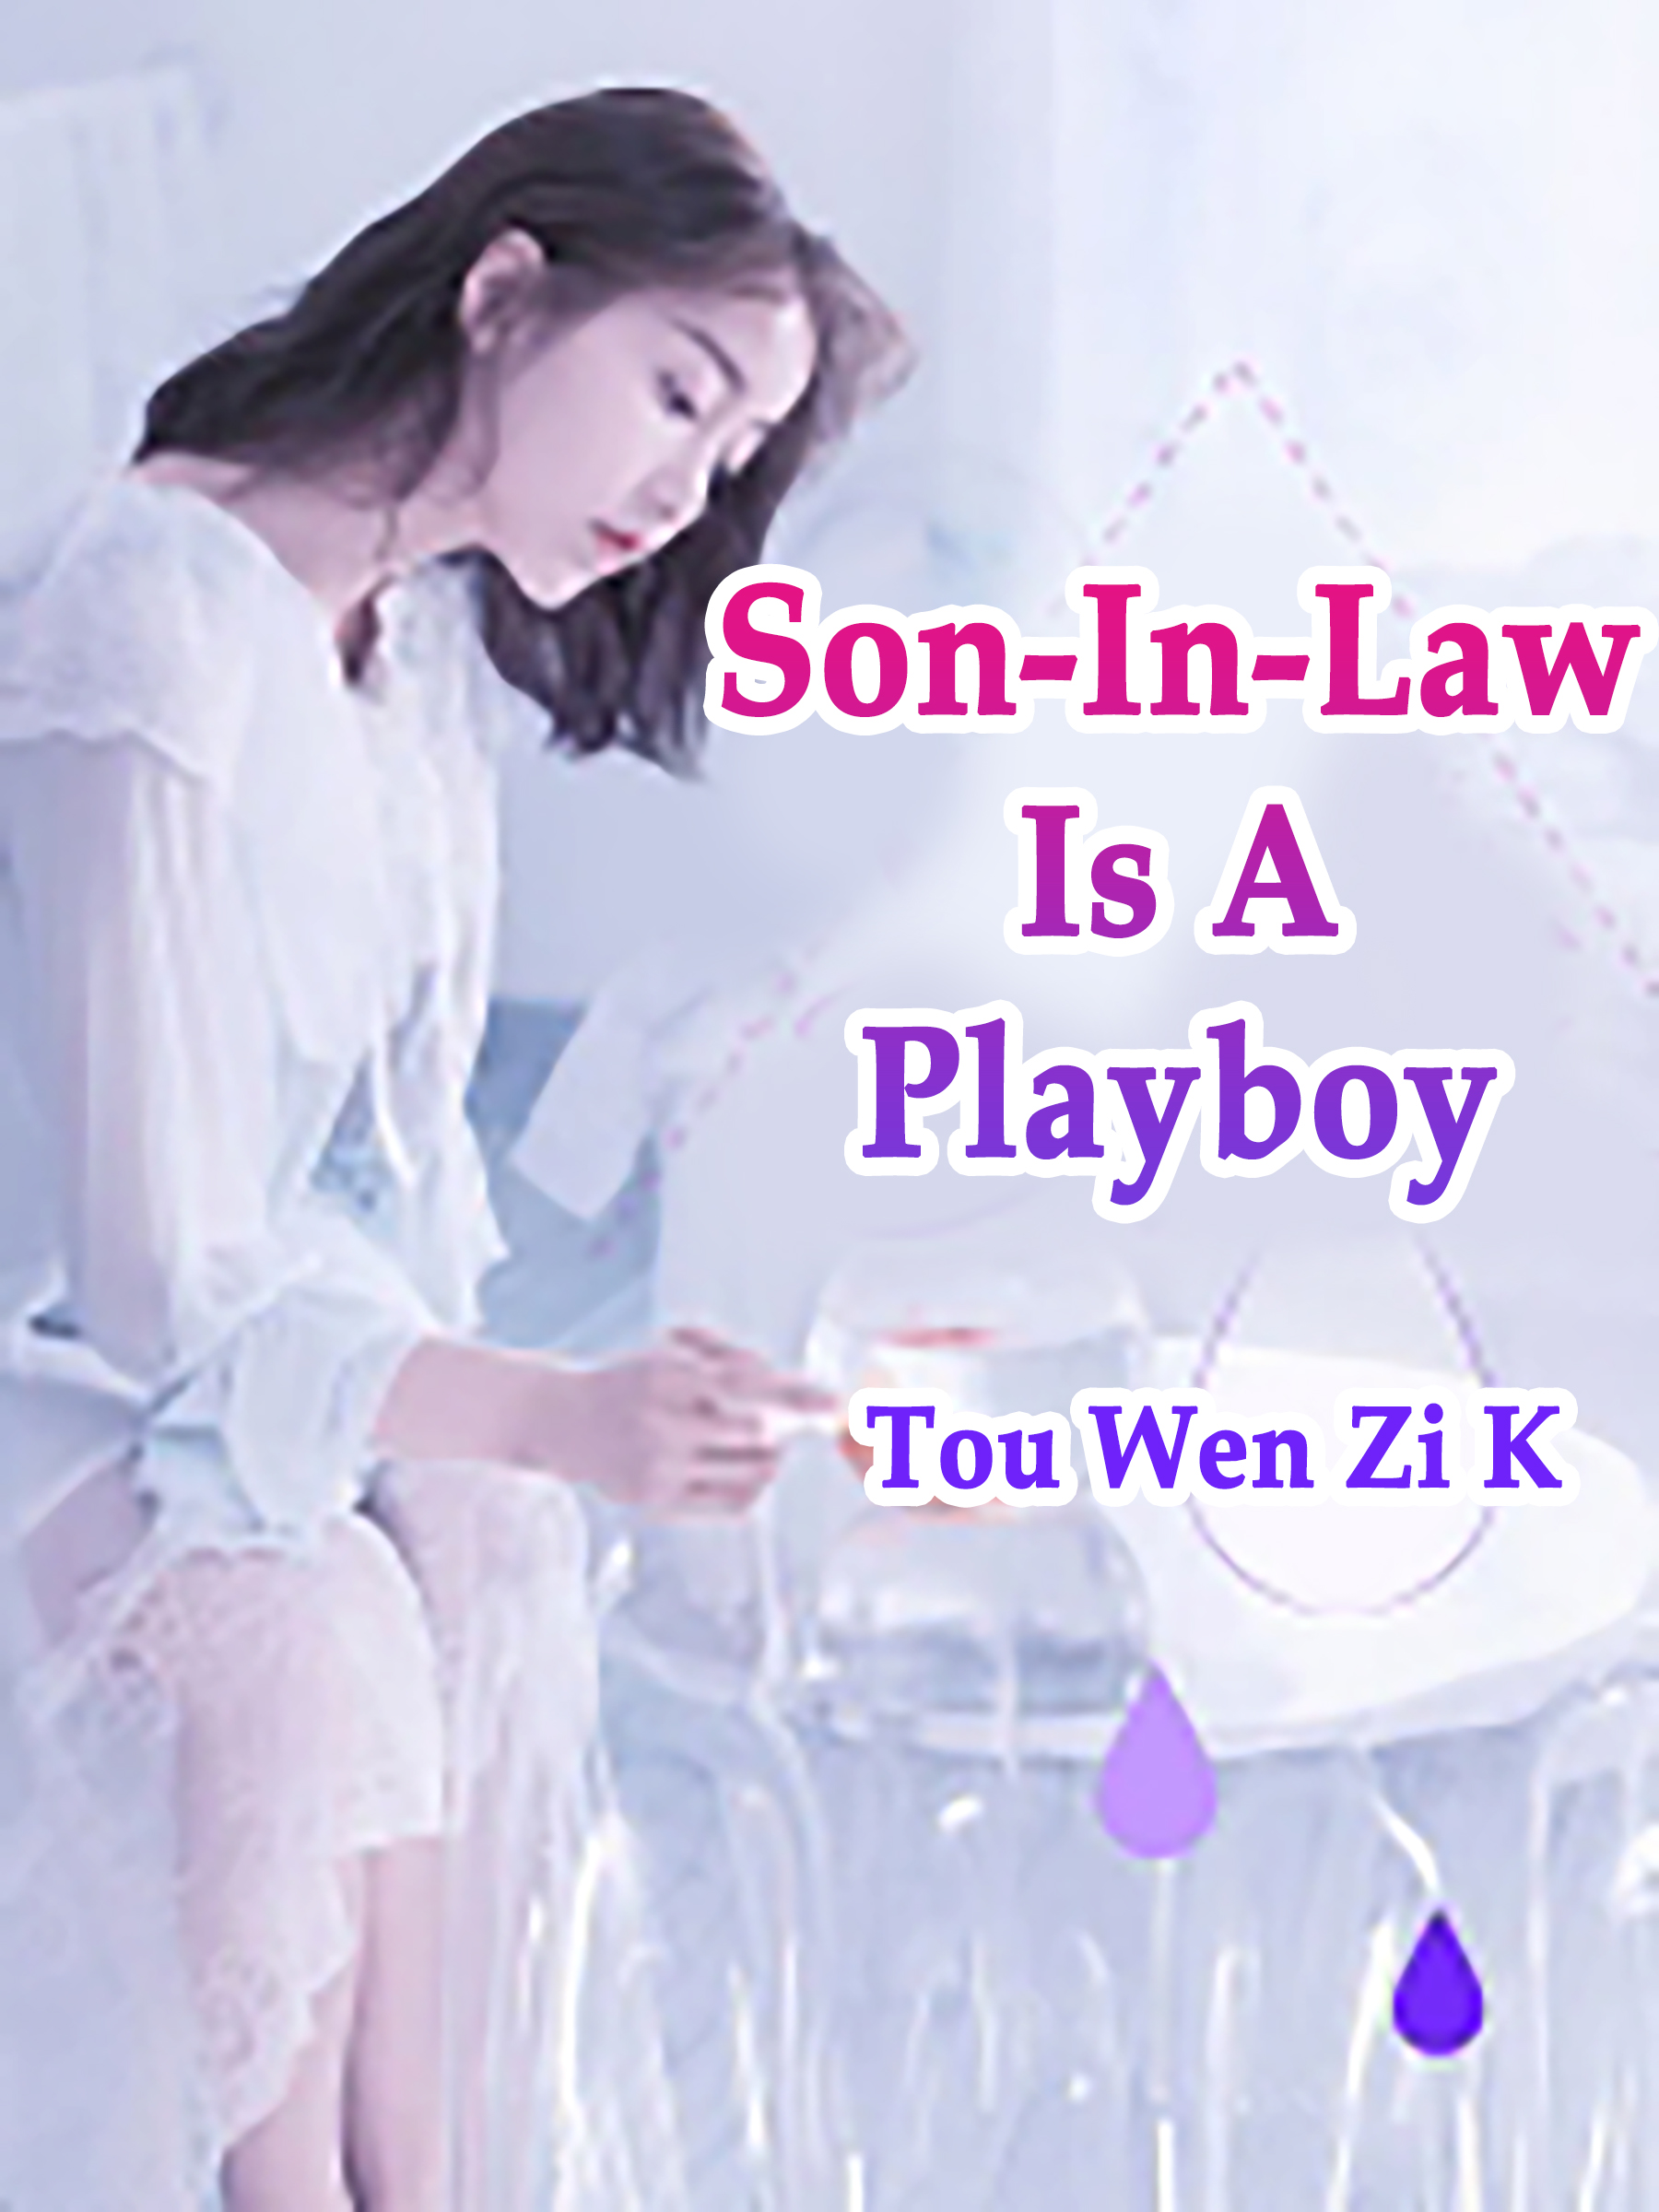 Son-In-Law Is A Playboy